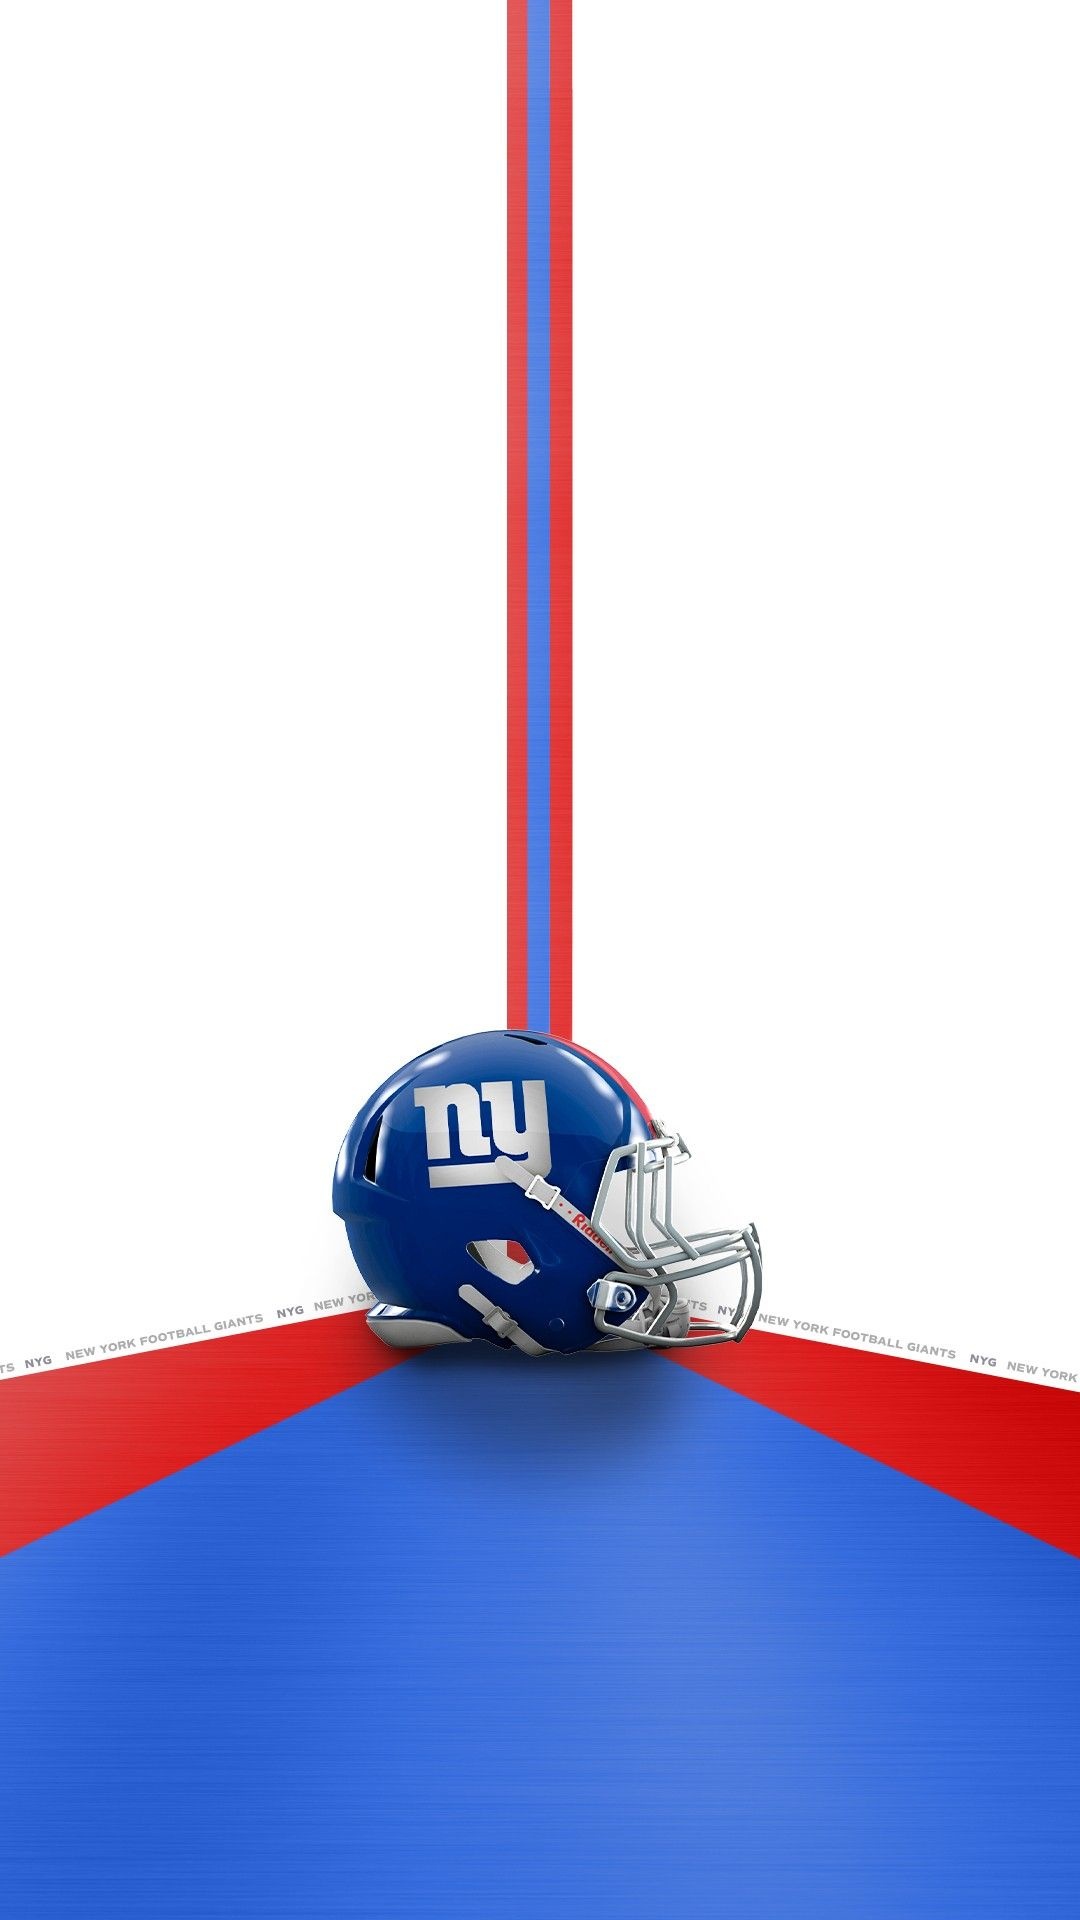 New York Giants: Known for several nicknames such as 'Big Blue,' 'G-Men,' and 'Jints'. 1080x1920 Full HD Wallpaper.